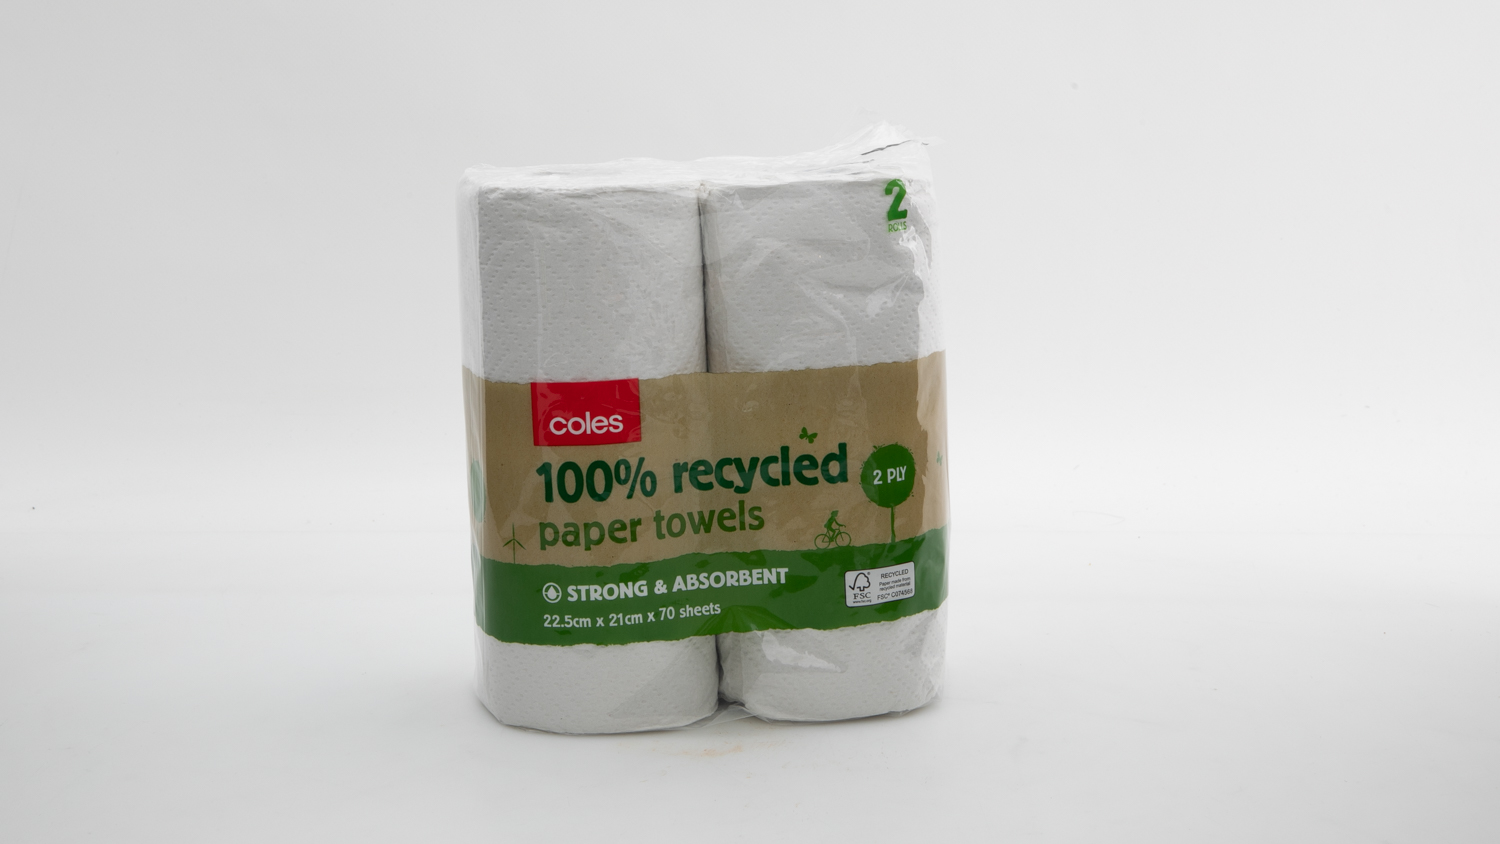 Coles 100% Recycled Paper Towels carousel image